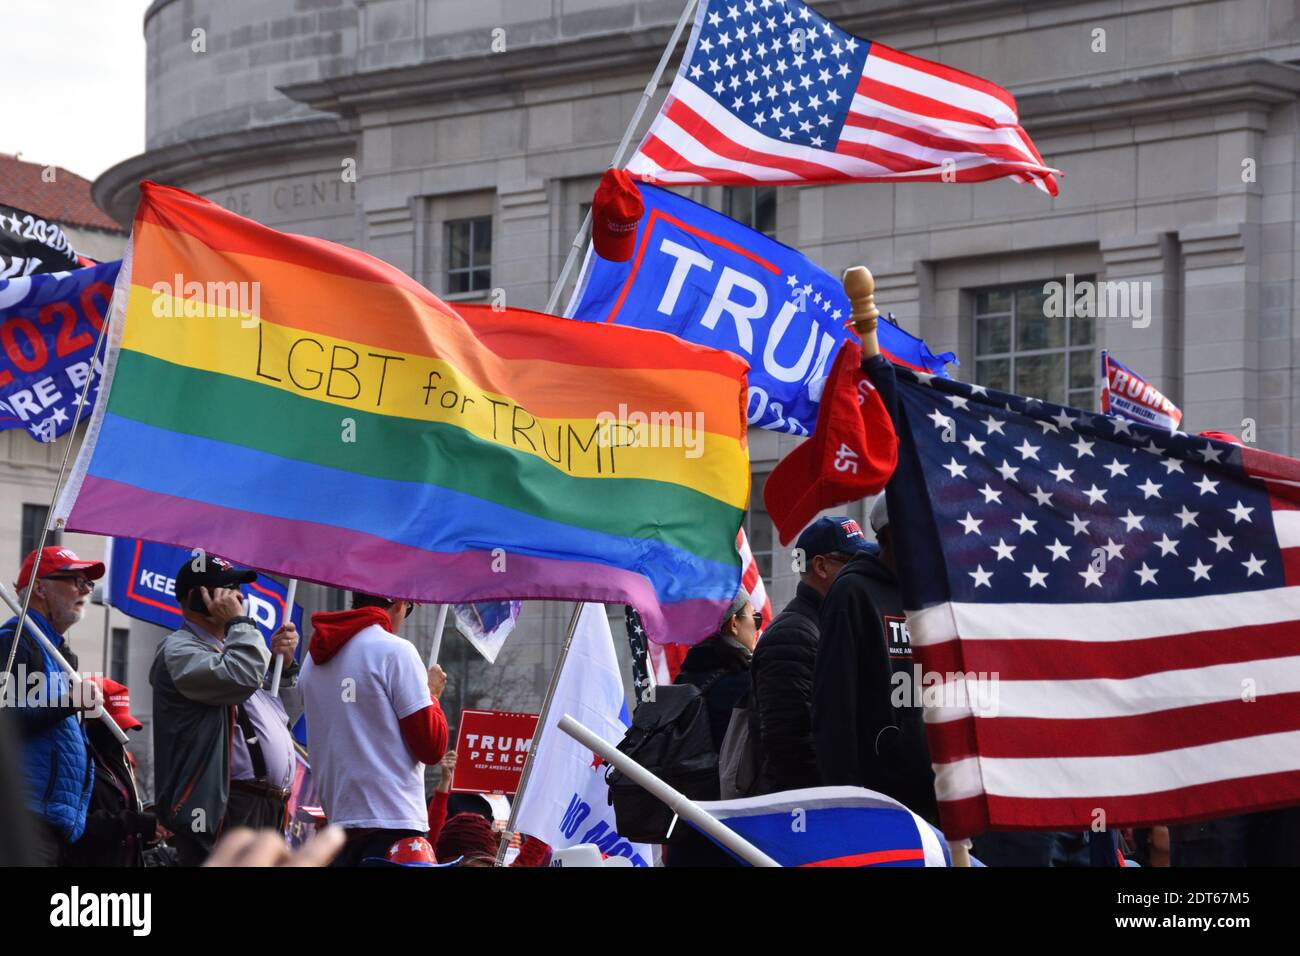 Washington DC. December 12, 2020. March for Trump to demand transparency and protect election integrity. ‘LGBT for Trump’ flag at Freedom plaza. Stock Photo